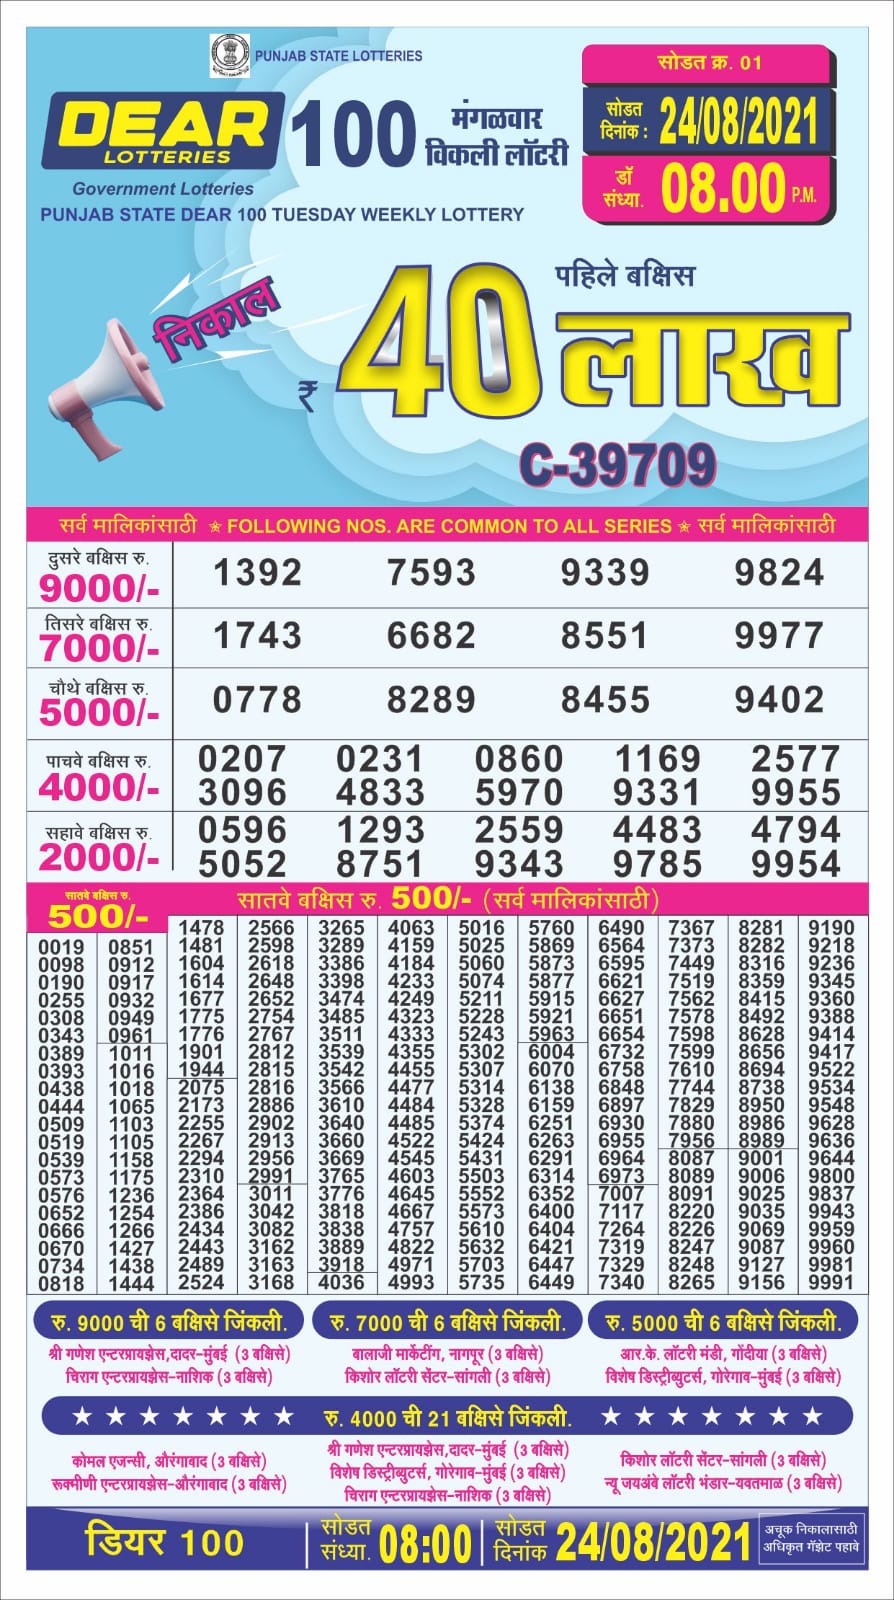 Dear lottery 100 weekly lottery 8 pm 24 august 2021